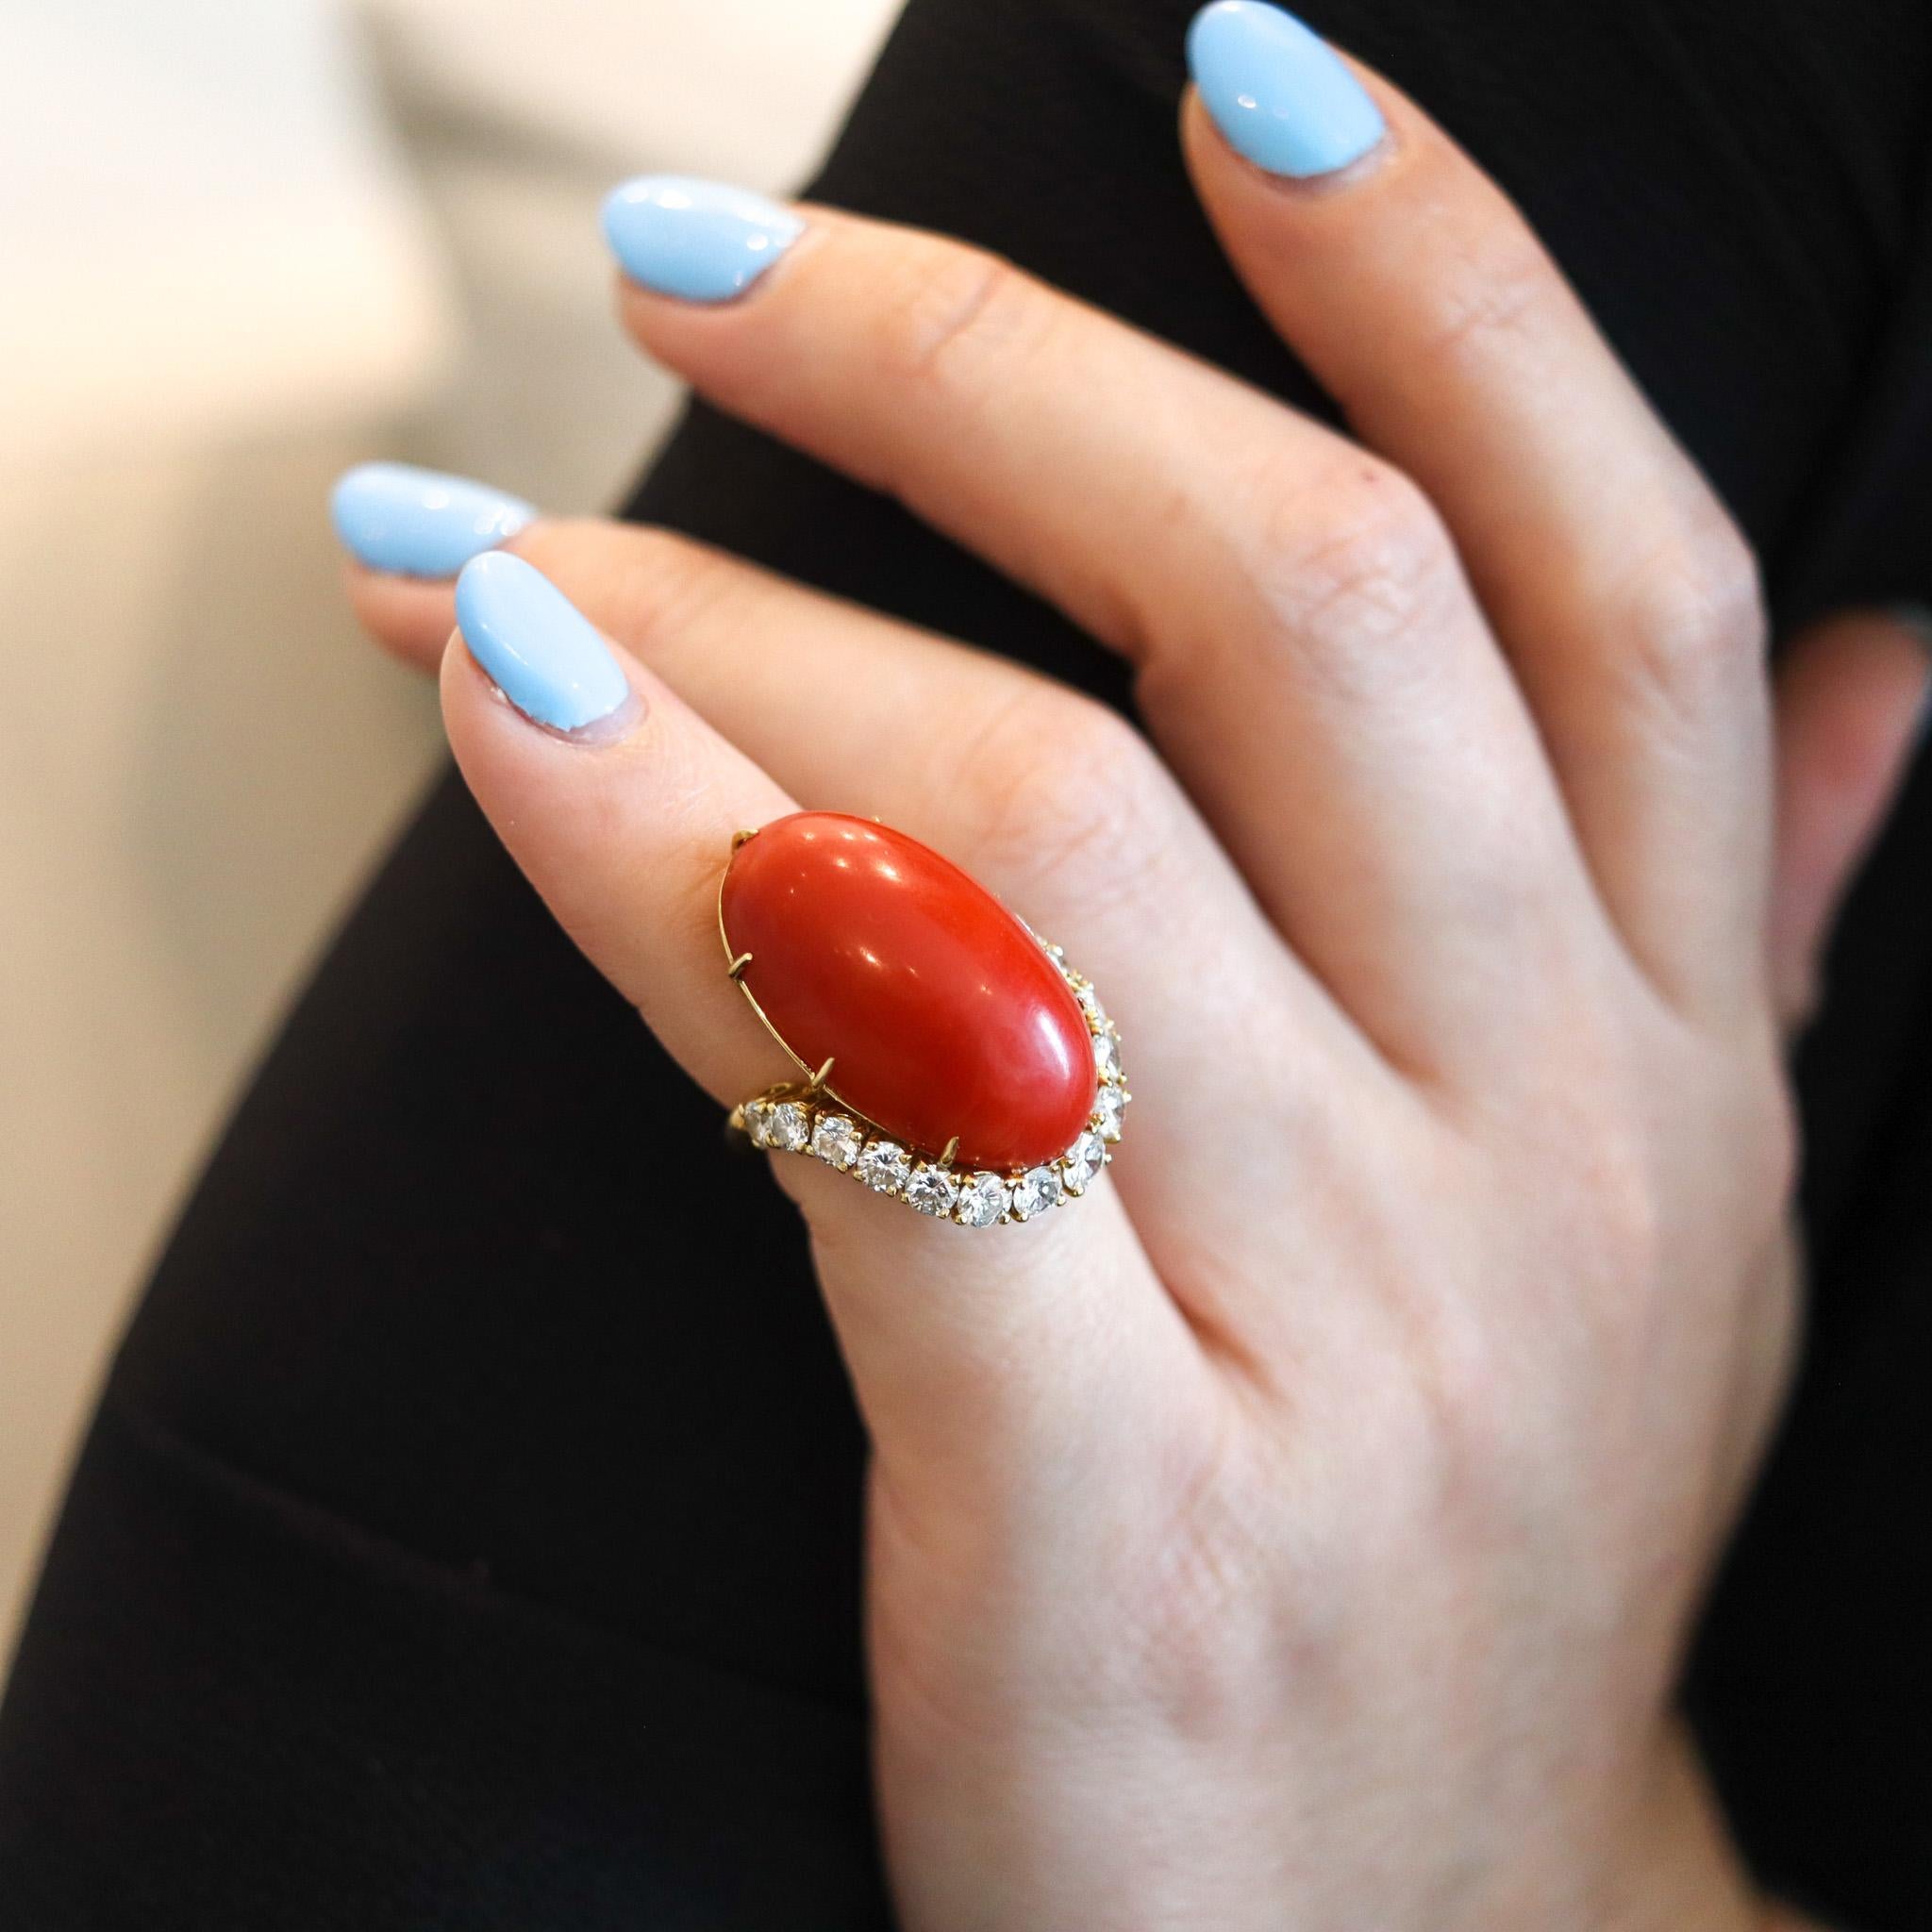 Boucheron Paris 1950 Modernist Ring In 18Kt Gold With 27.52 Ctw Diamonds & Coral For Sale 1